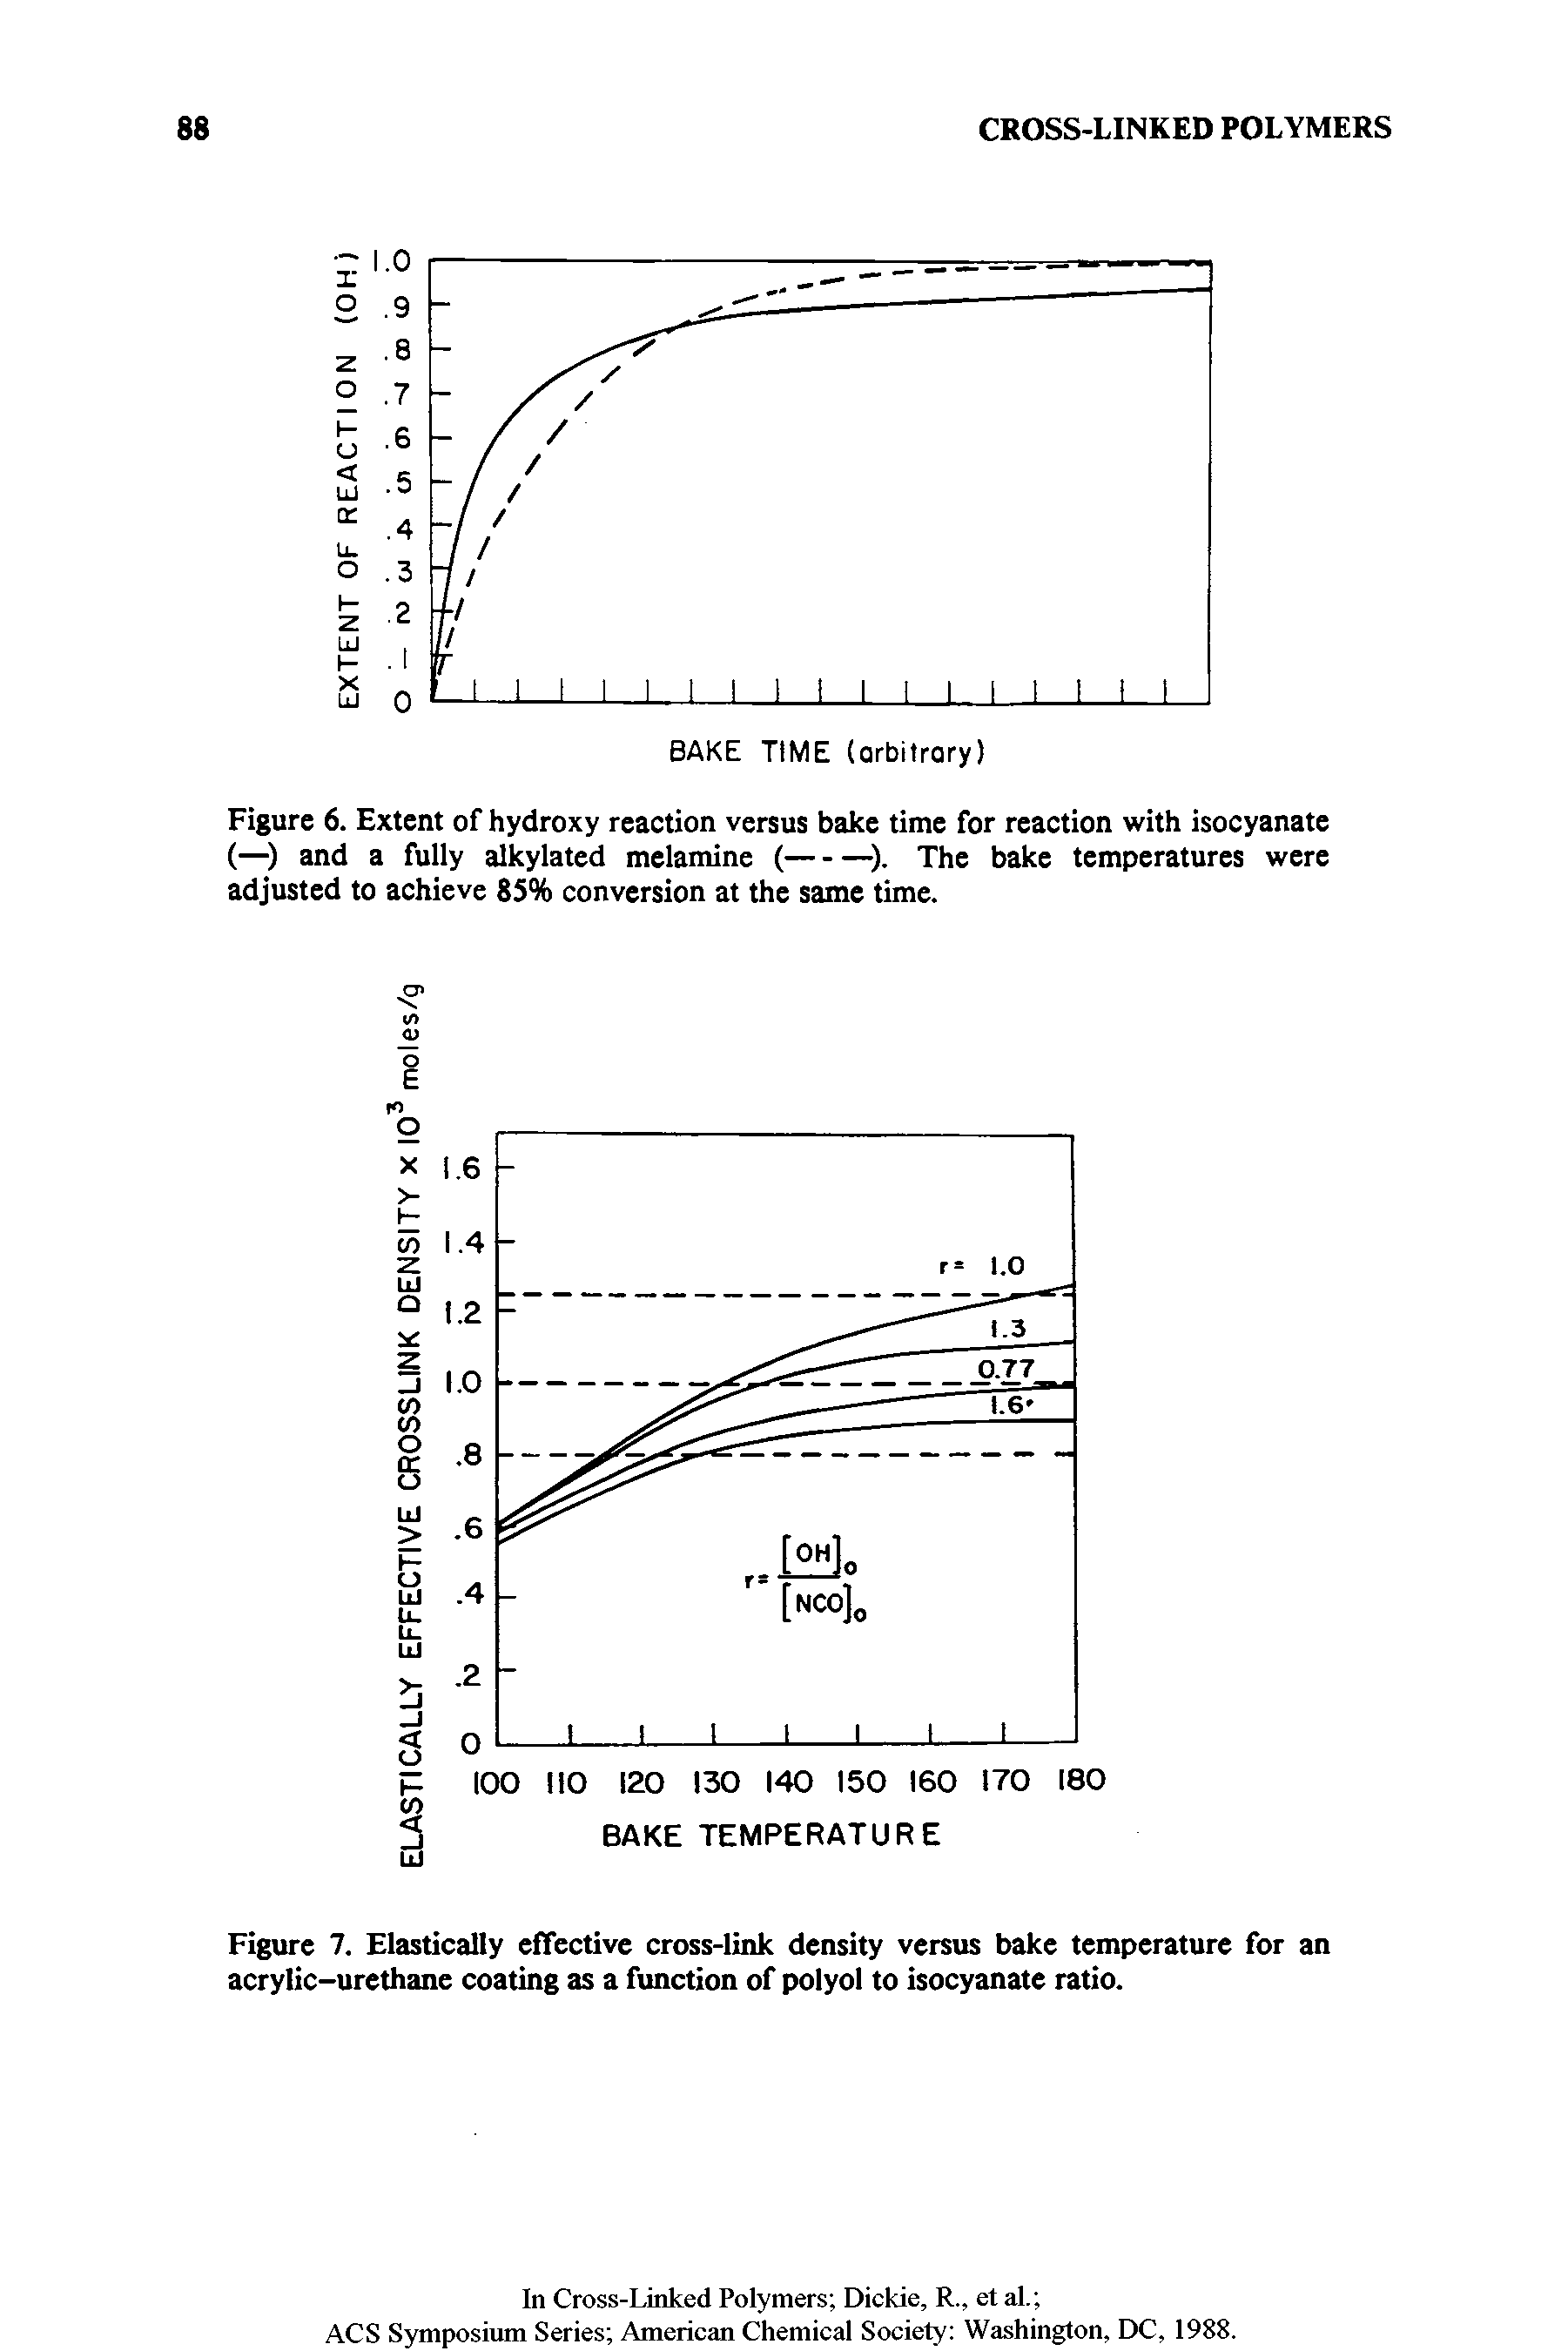 Figure 7. Elastically effective cross-link density versus bake temperature for an acrylic-urethane coating as a function of polyol to isocyanate ratio.